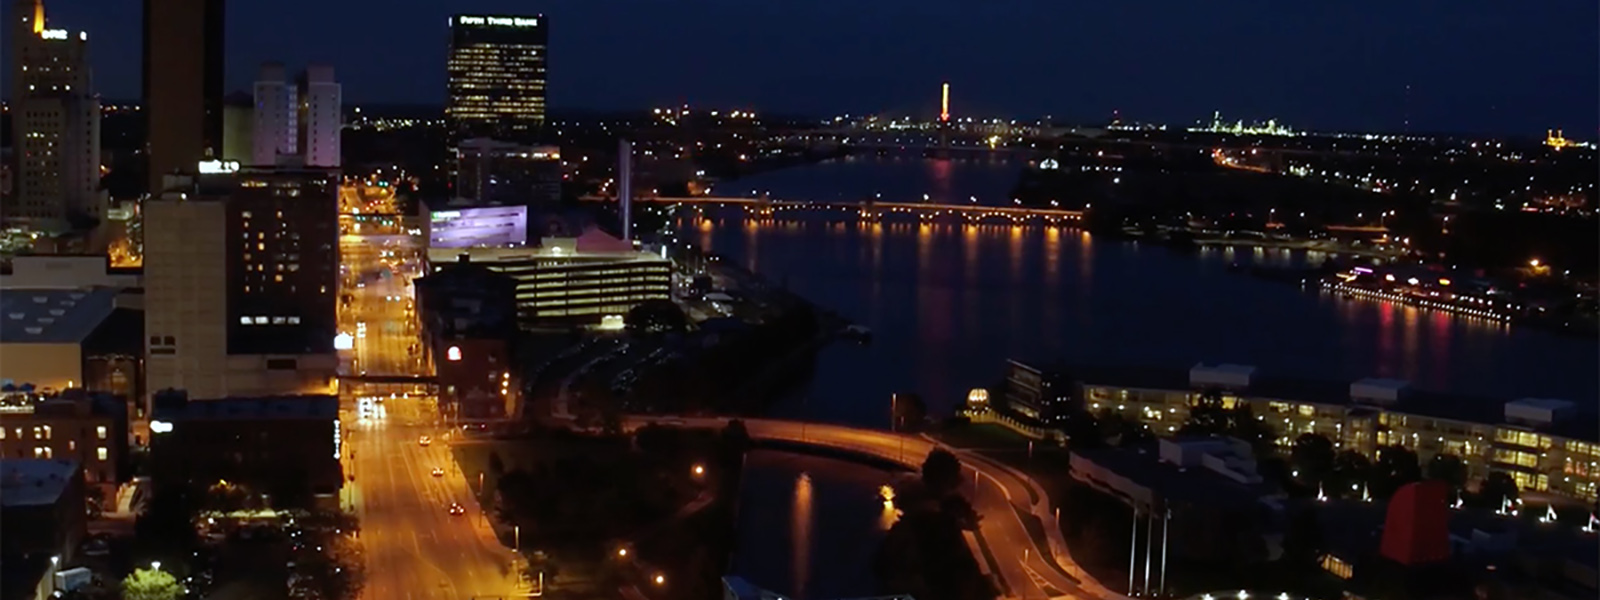 Downtown Toledo at night